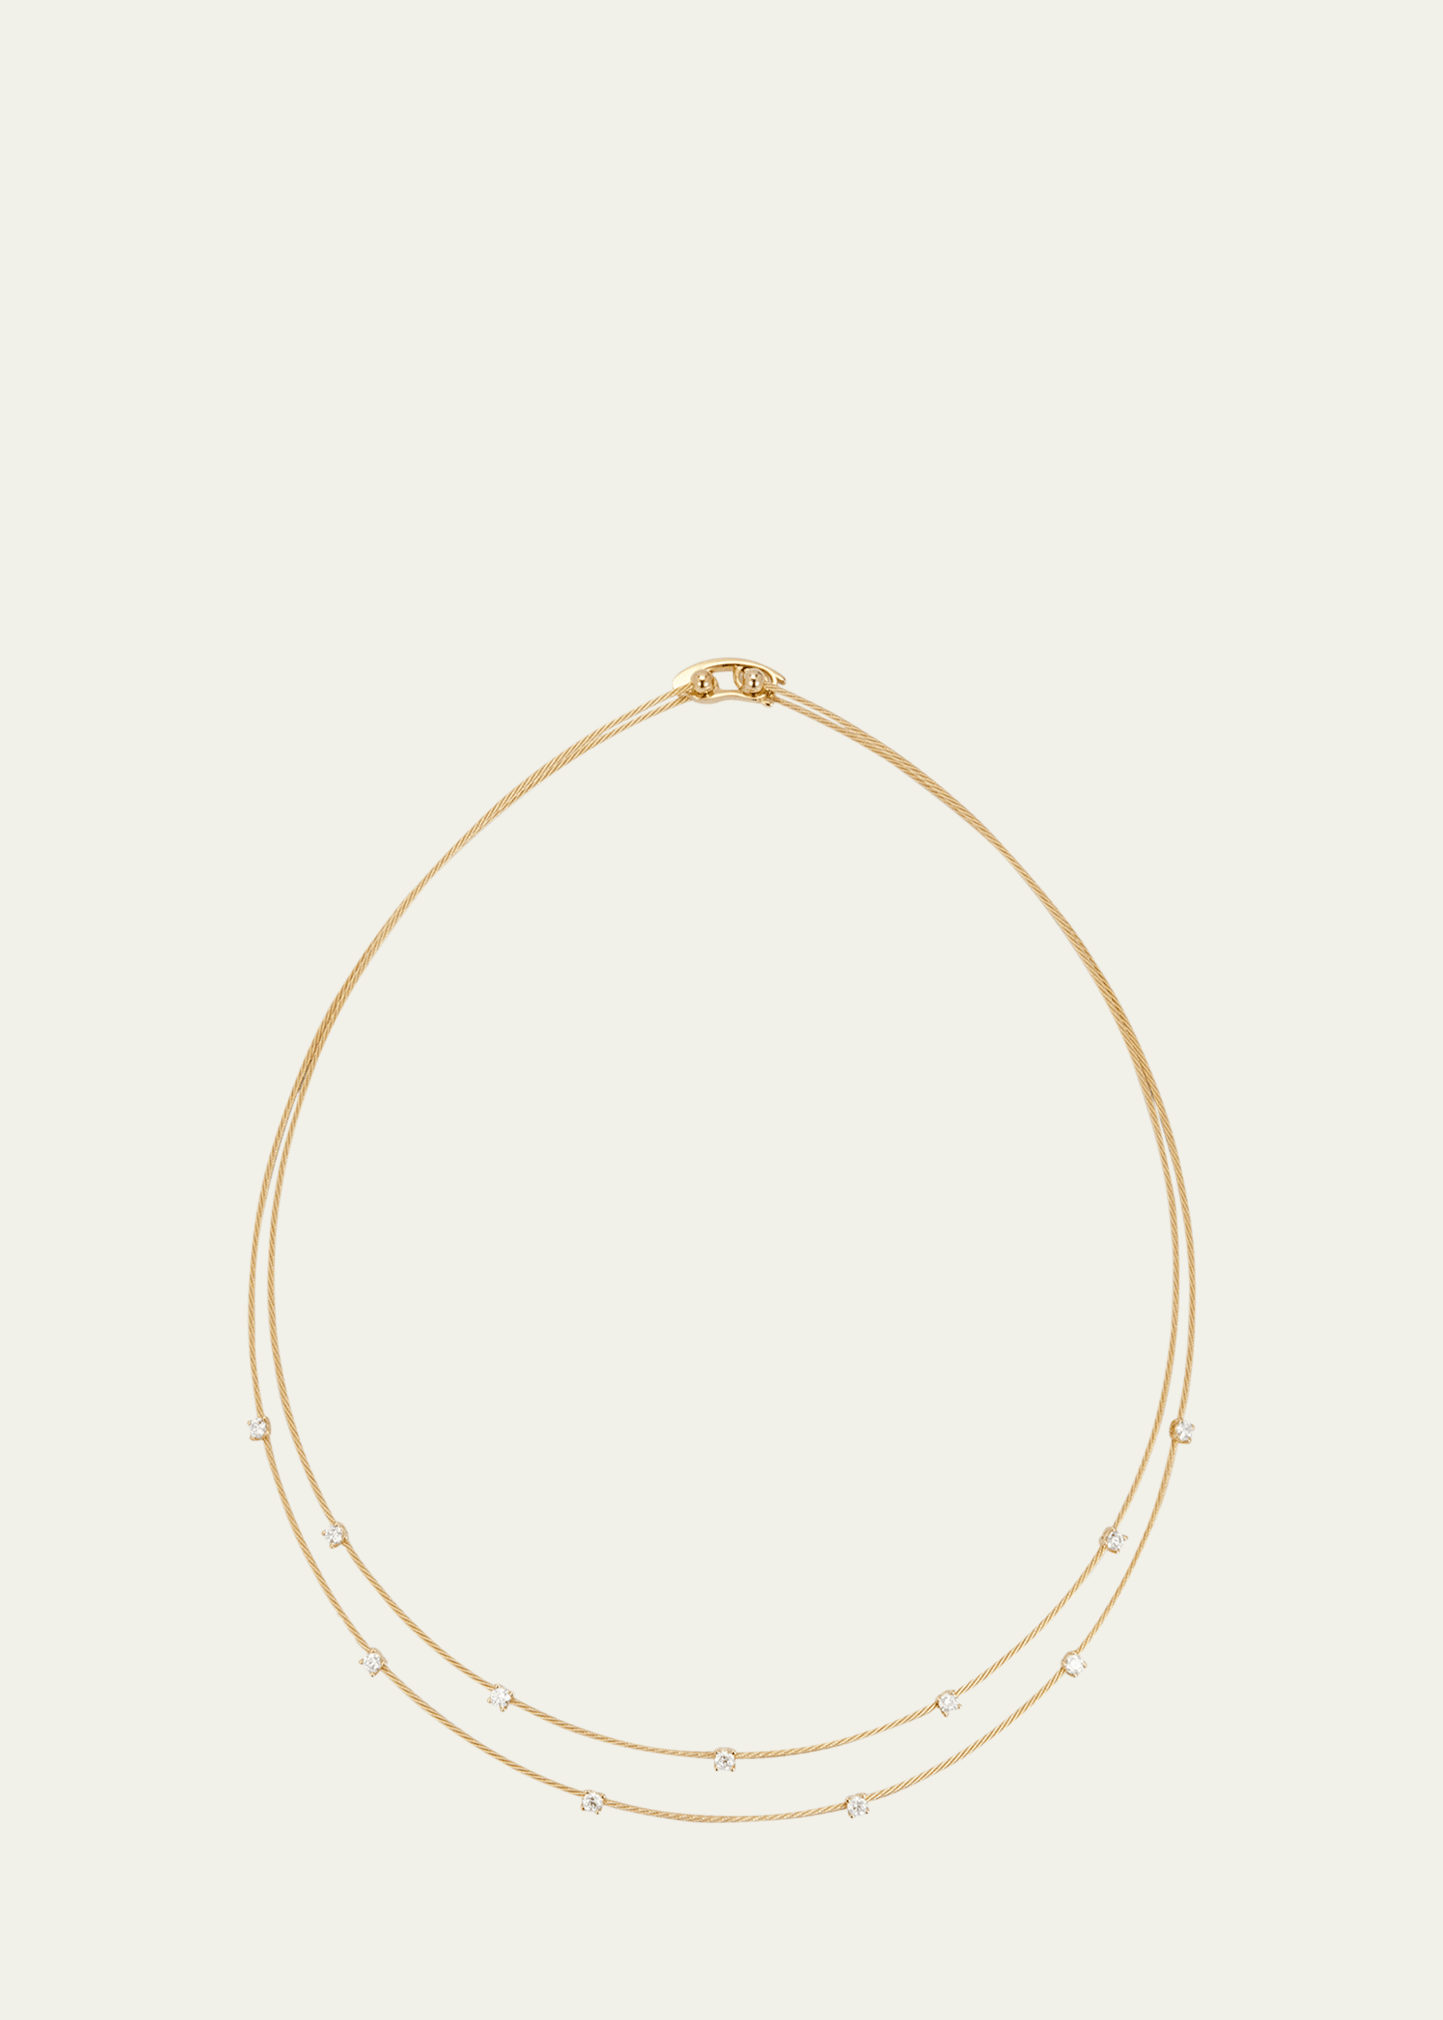 Paul Morelli 18k Yellow Gold Double Wire Necklace With Diamonds